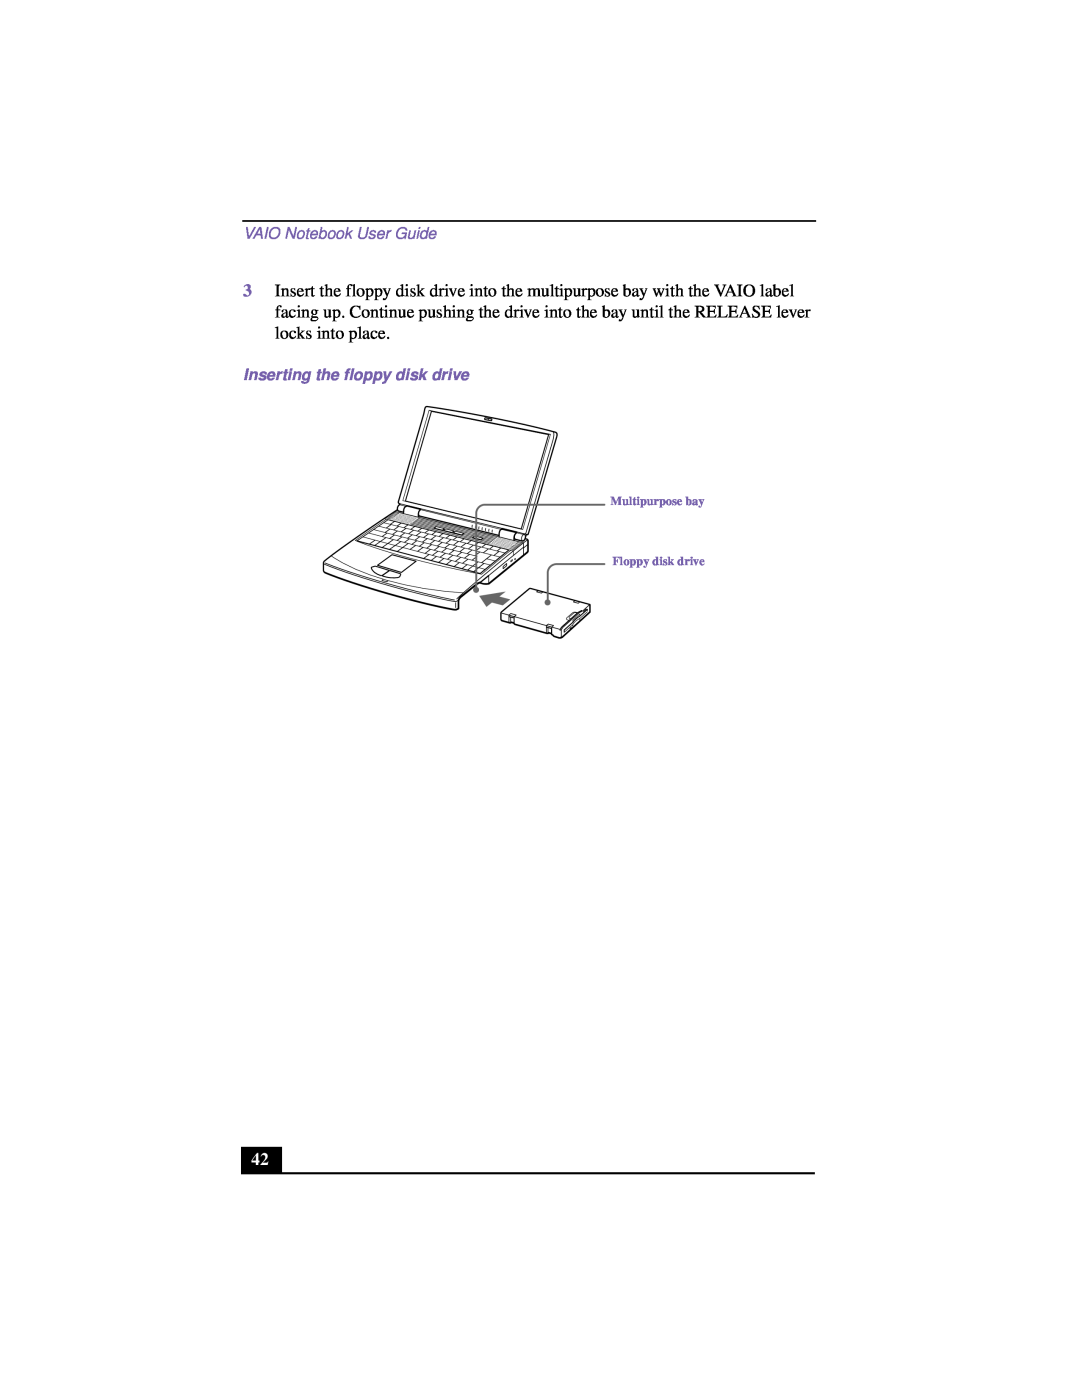 Sony PCG-F640 manual VAIO Notebook User Guide, Inserting the floppy disk drive, Multipurpose bay Floppy disk drive 